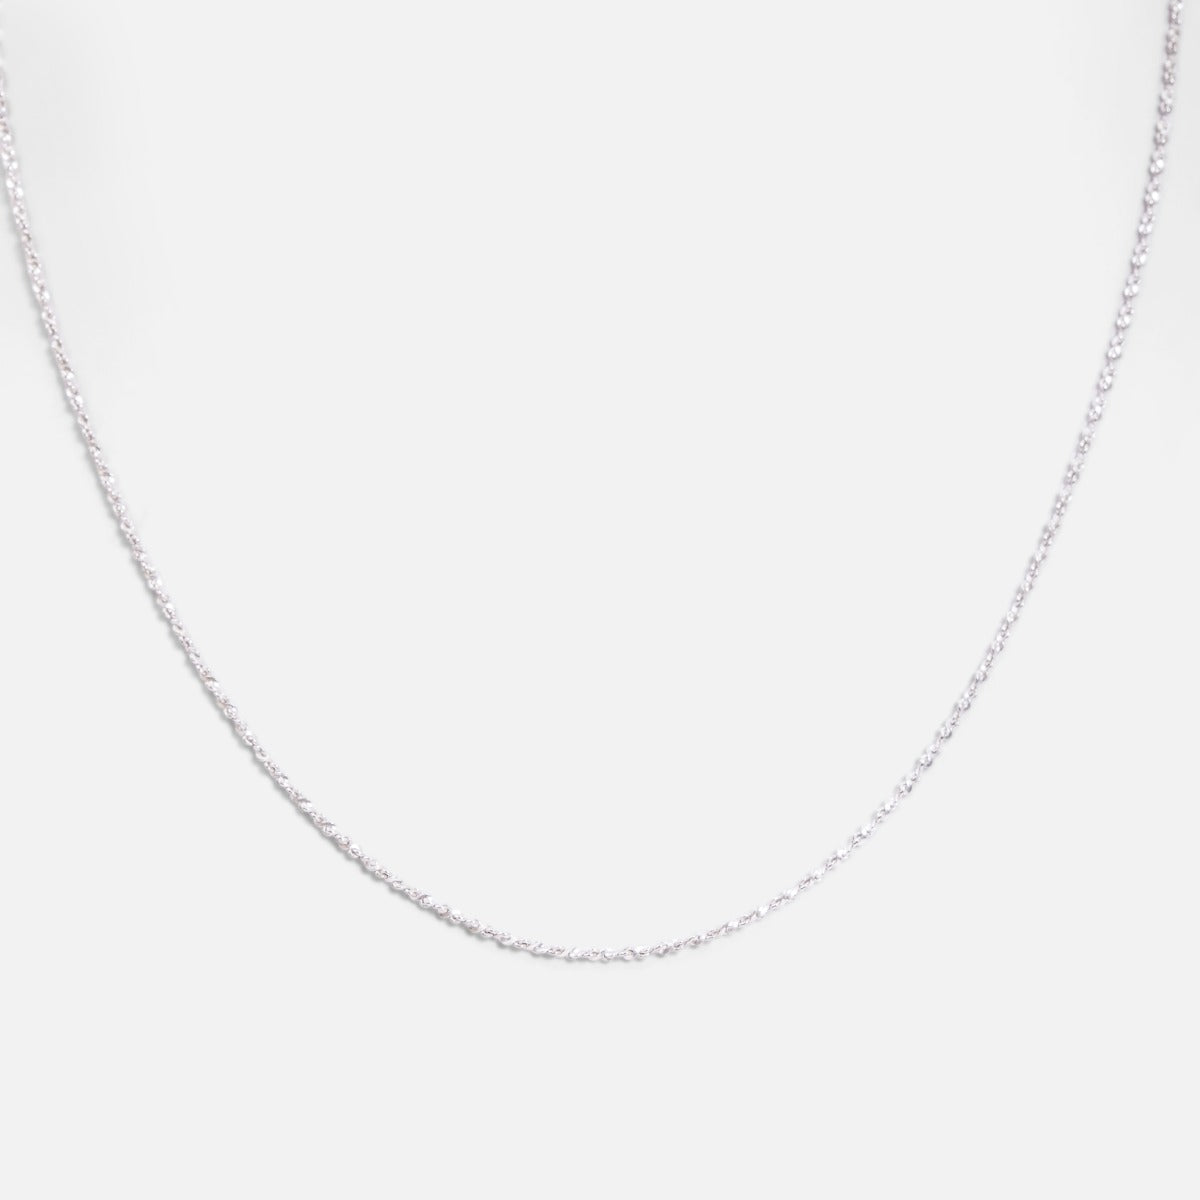 Sterling silver chain 18 inches with intertwined mesh